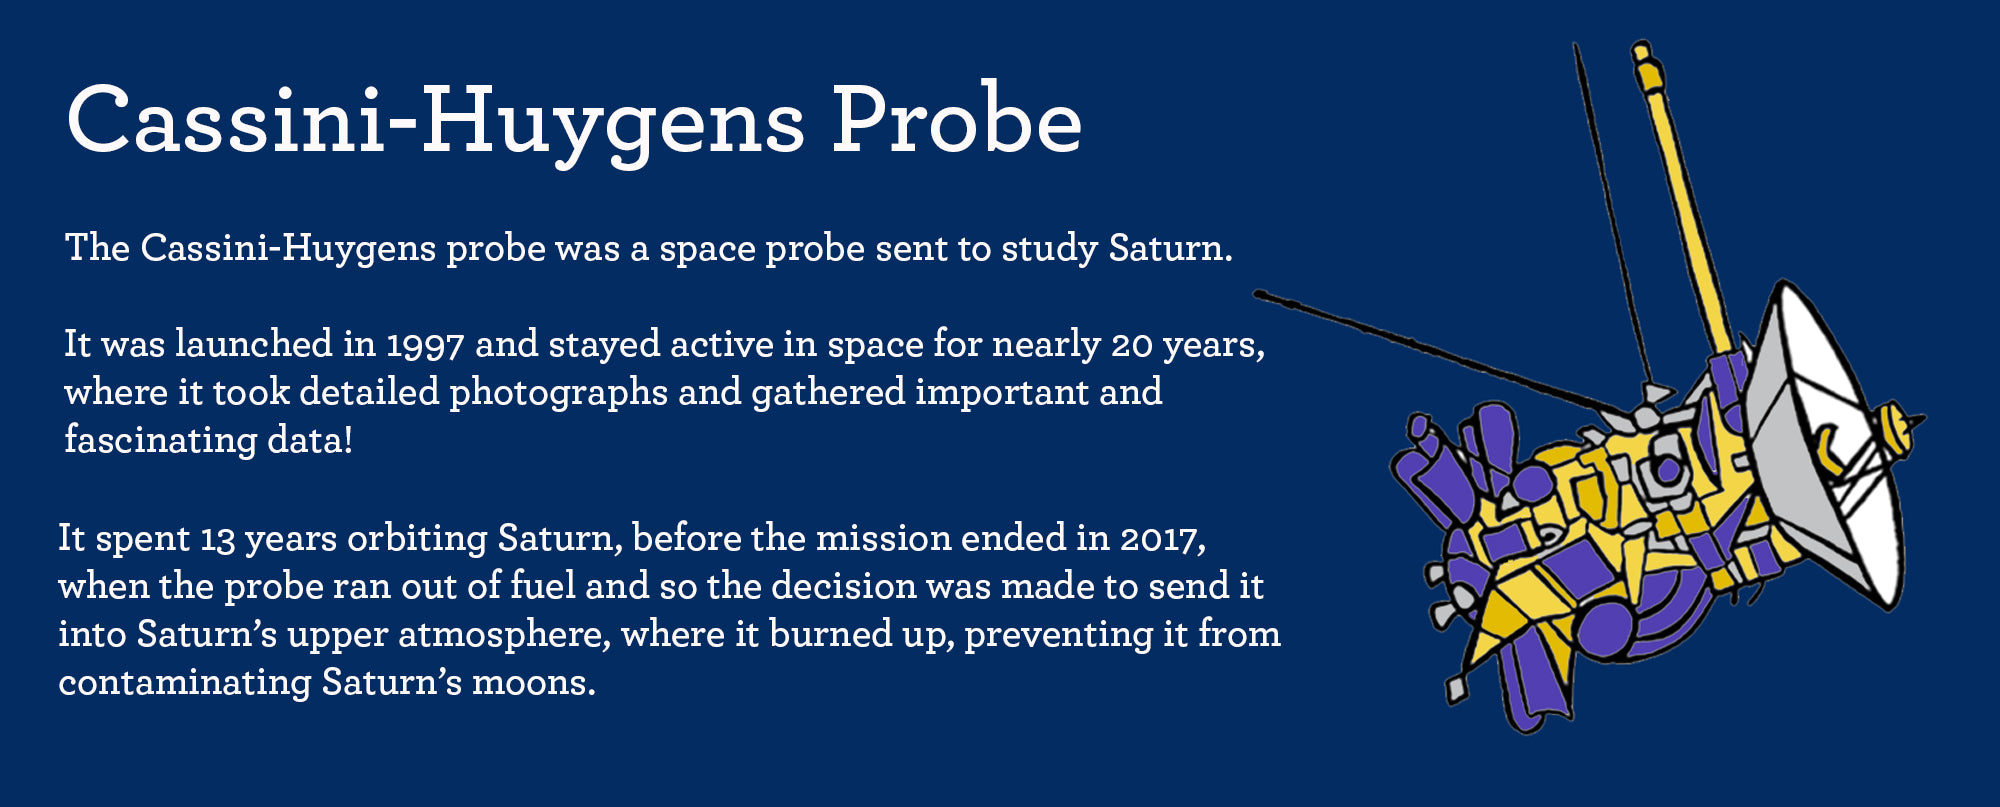 facts about cassini-huygens probe